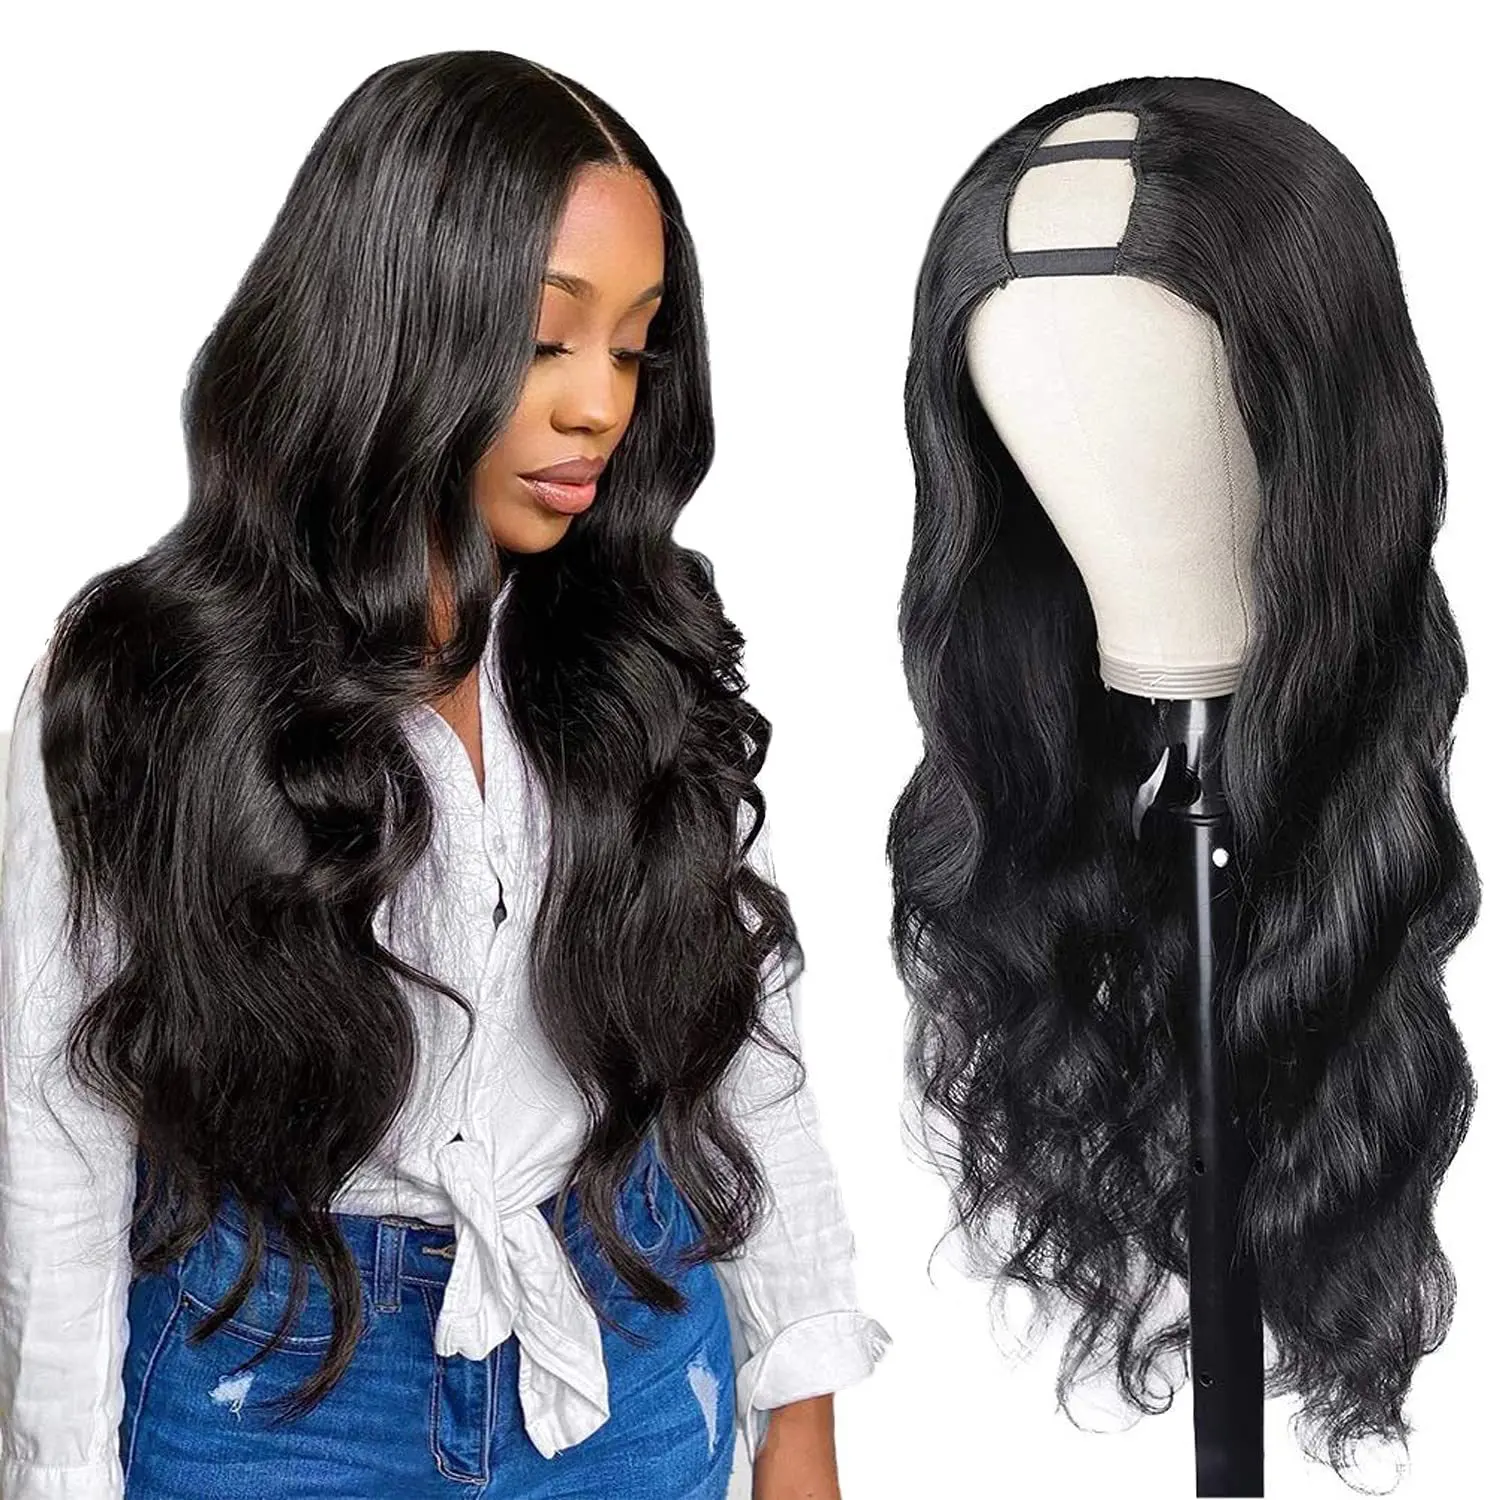 10a hd full lace wig loose deep wave virgin hair wig,virgin malaysian hair full lace wig,russian virgin glueless full lace wig